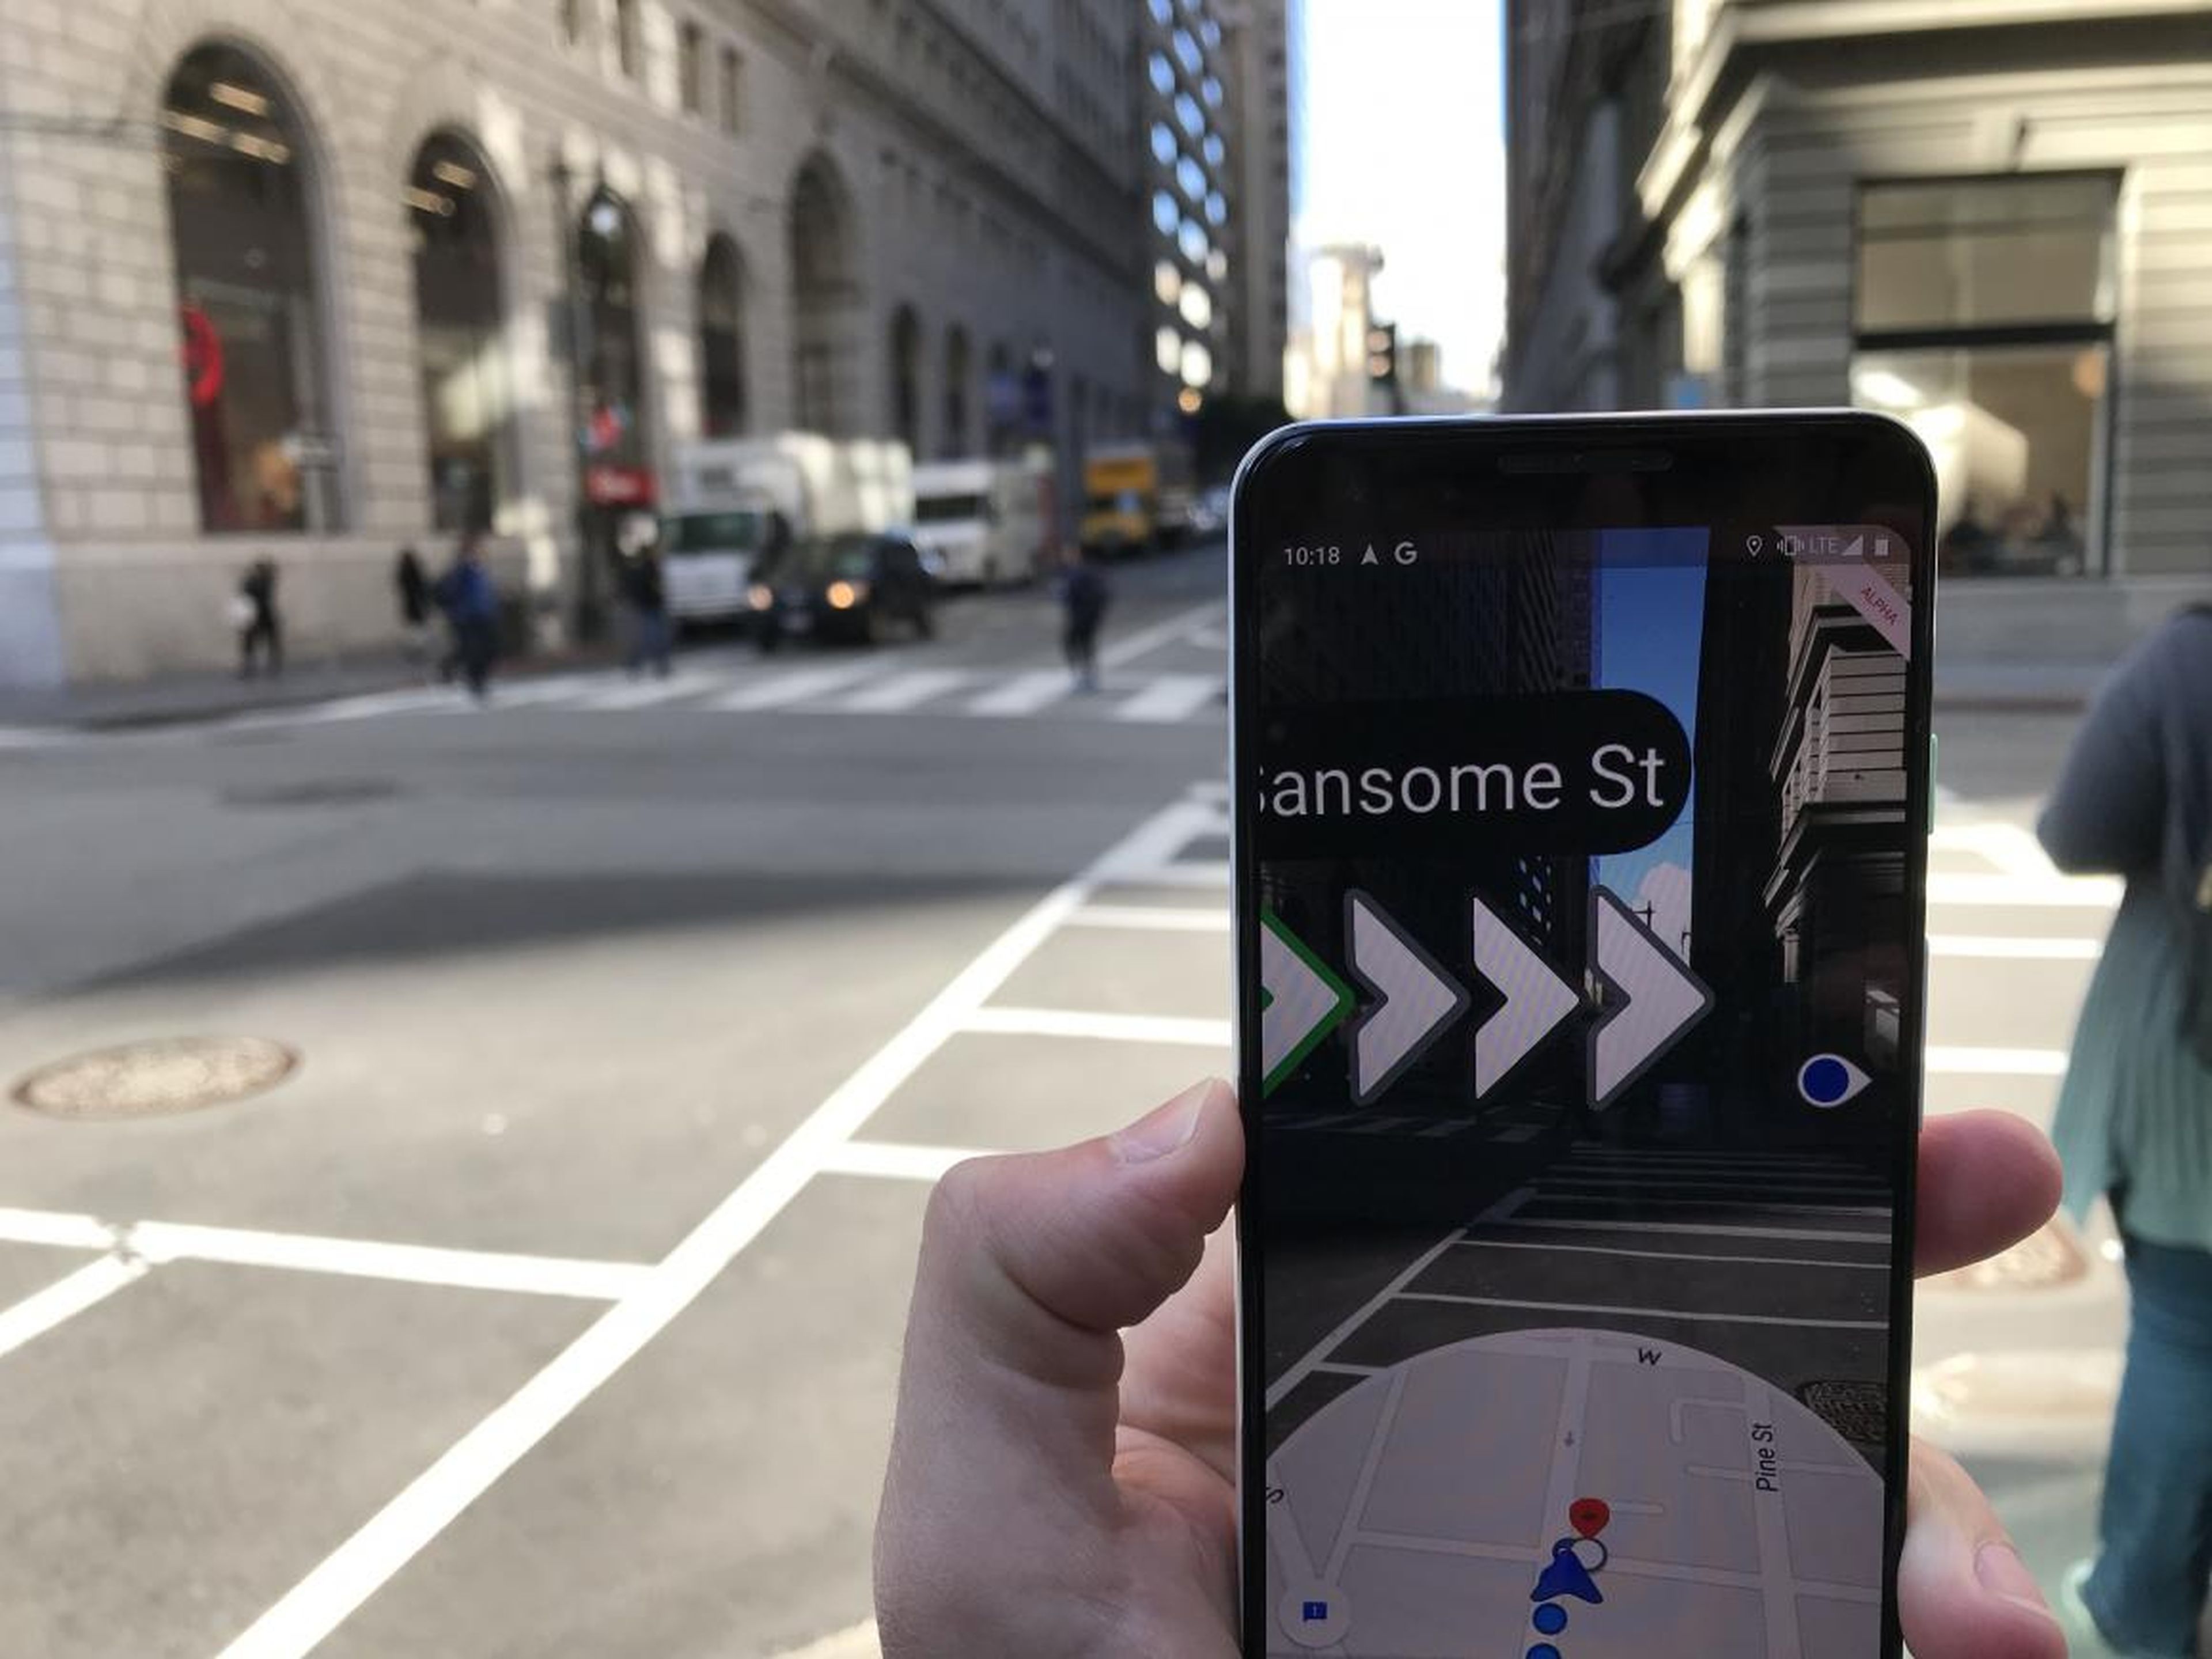 Once Google knows exactly where you are, it displays arrows on your screen to make sure you're on track and heading in the right direction.